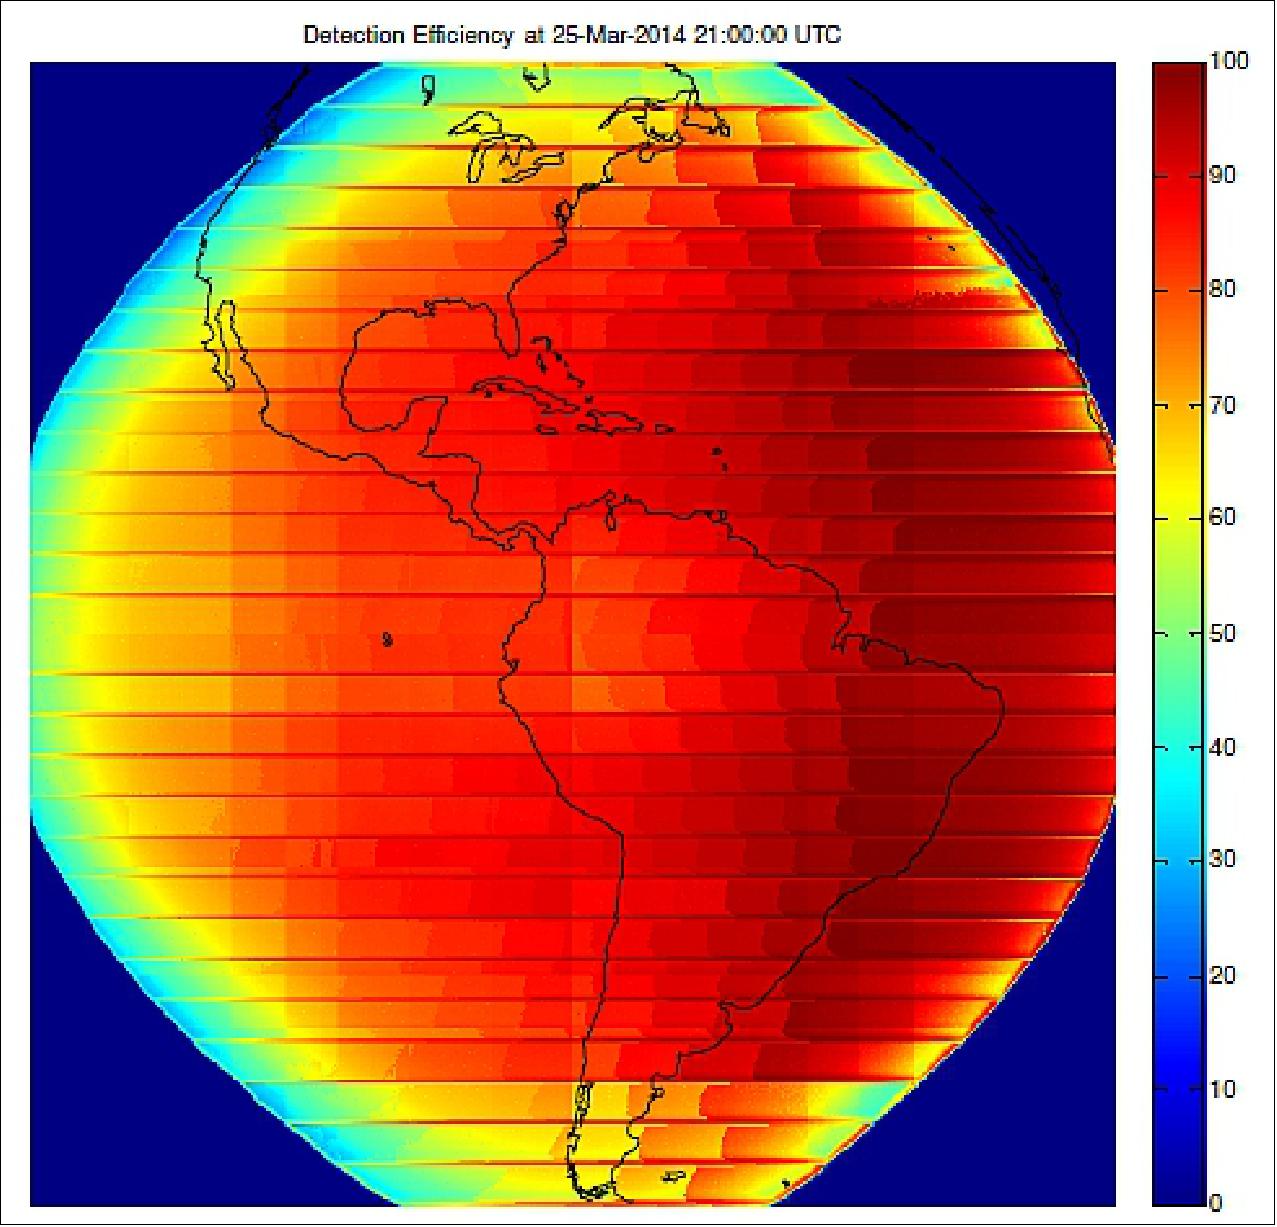 Figure 66: Calculated detection efficiency of each GLM pixel, in percent, at 4 PM local time as seen from GOES-East satellite (image credit: Lockheed Martin STAR Labs)